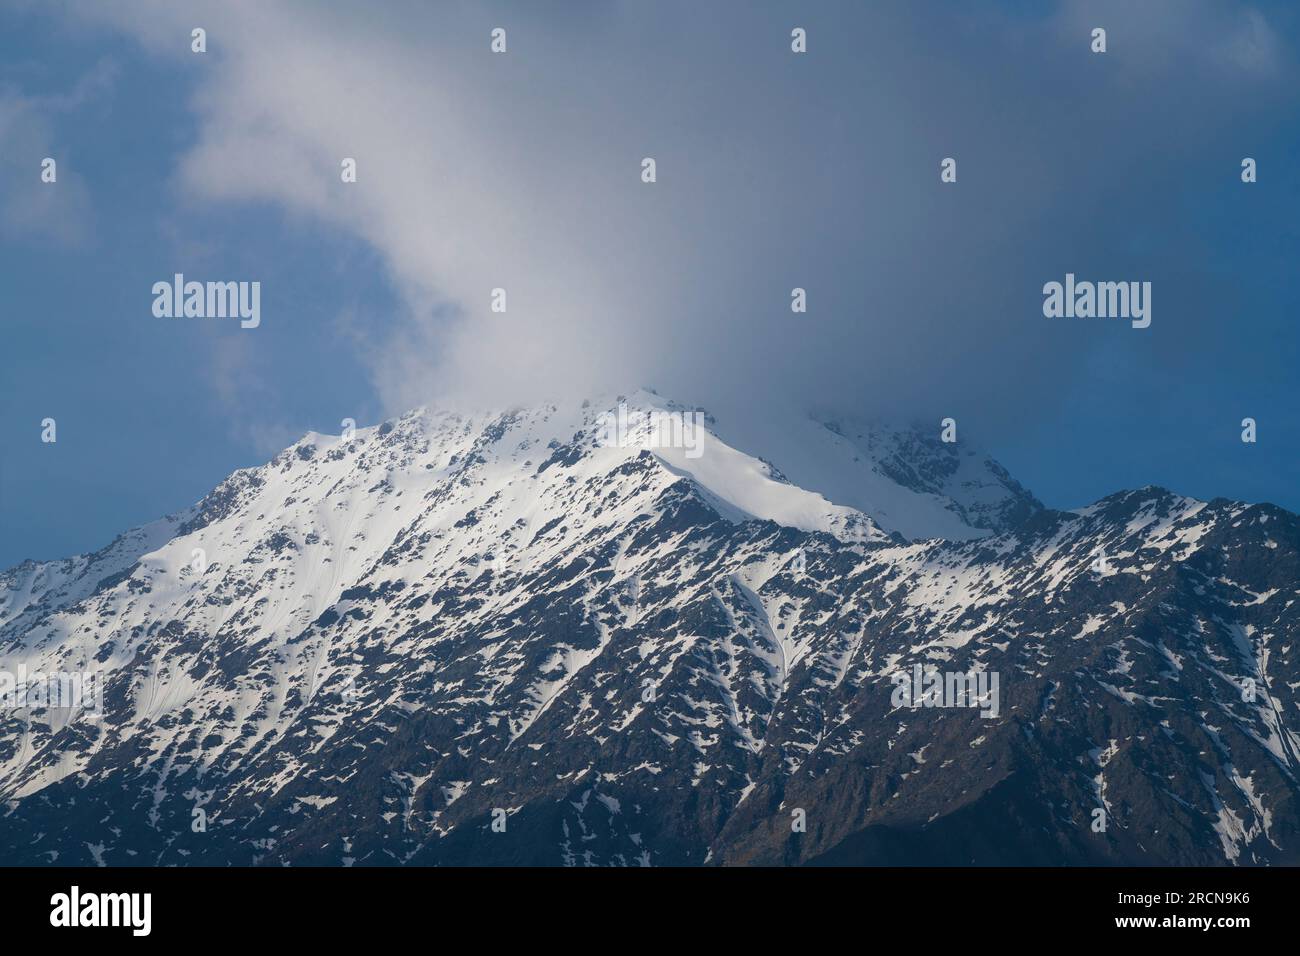 Snow covered mountain with peak hidden by a cloud. Northern Caucasus, Russia Stock Photo